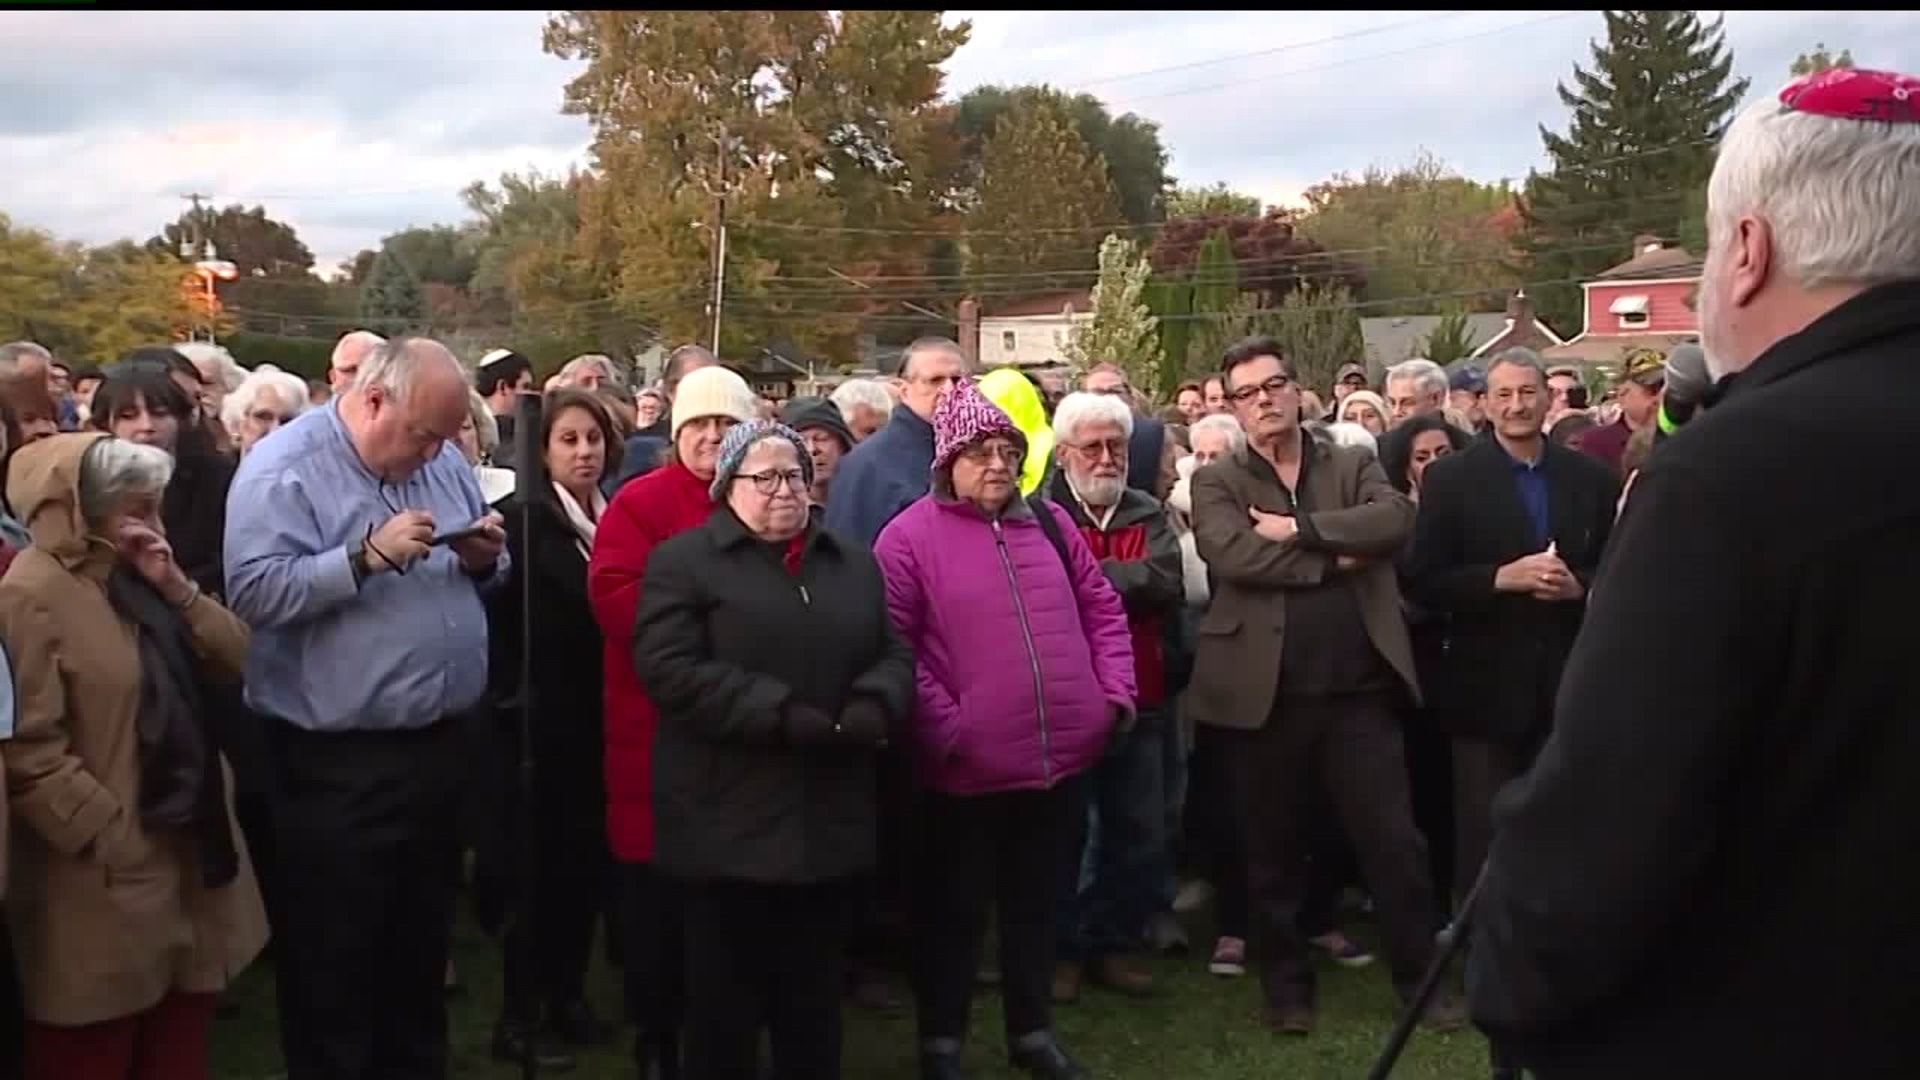 Vigil held in Harrisburg for synagogue shooting victims